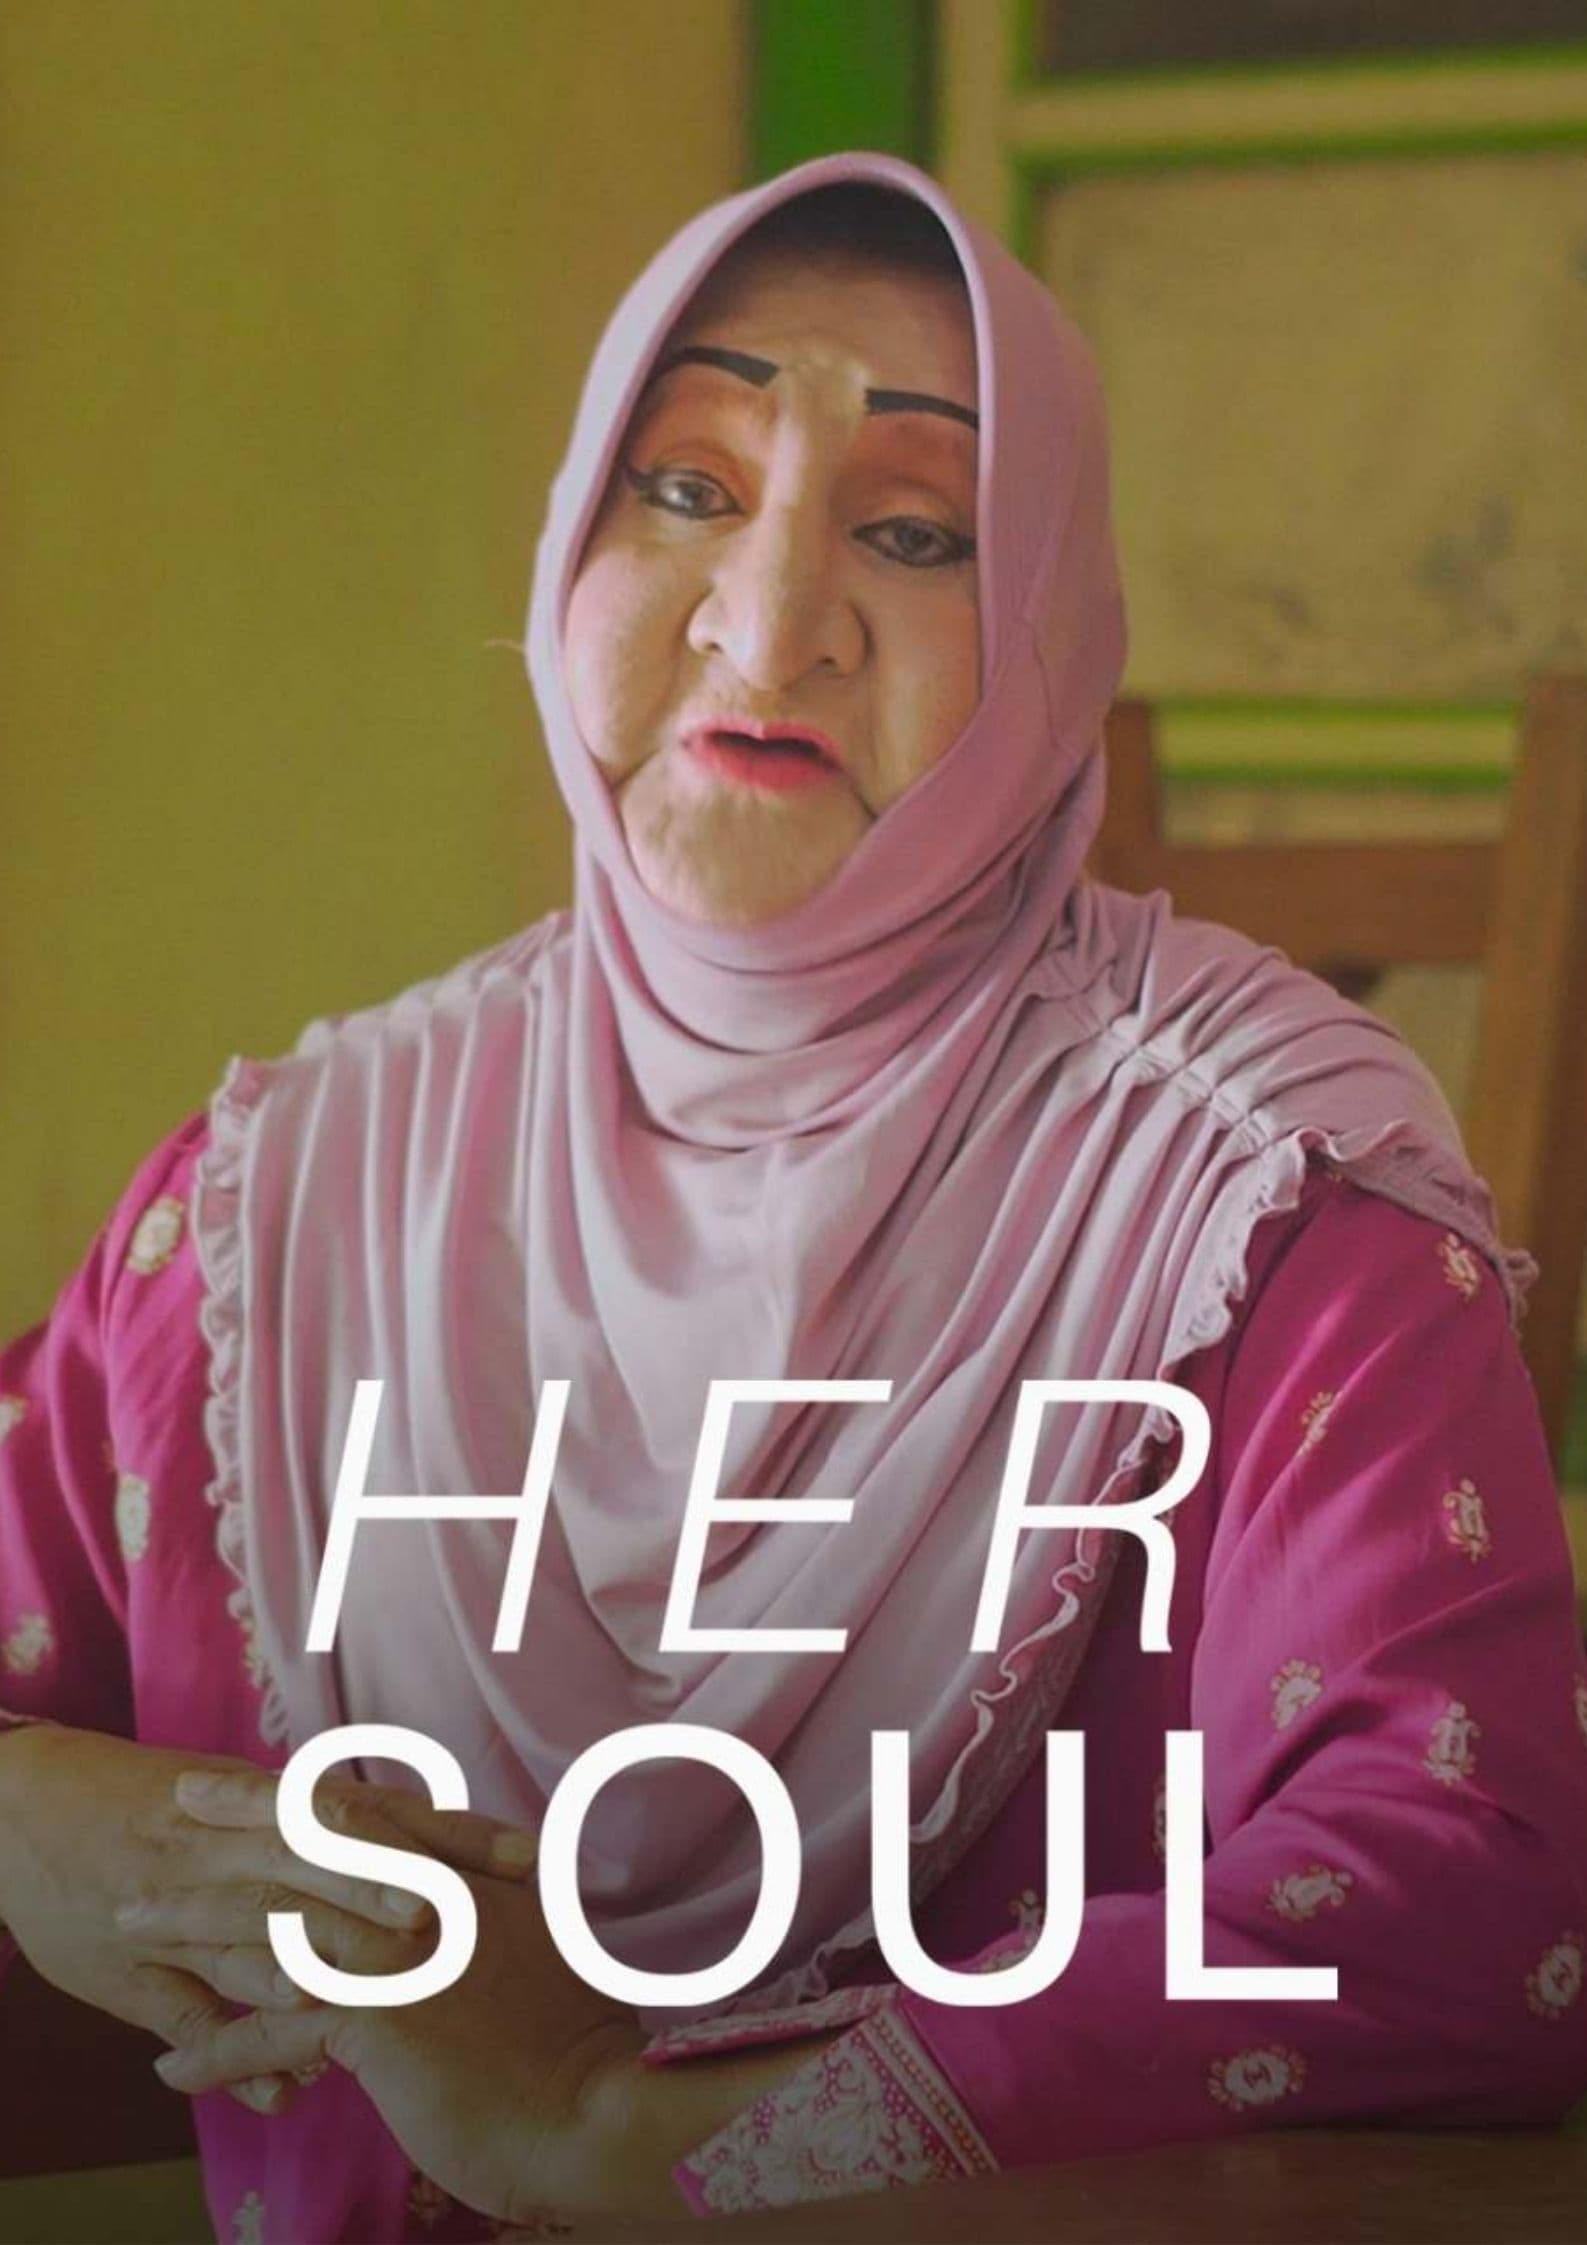 Her Soul